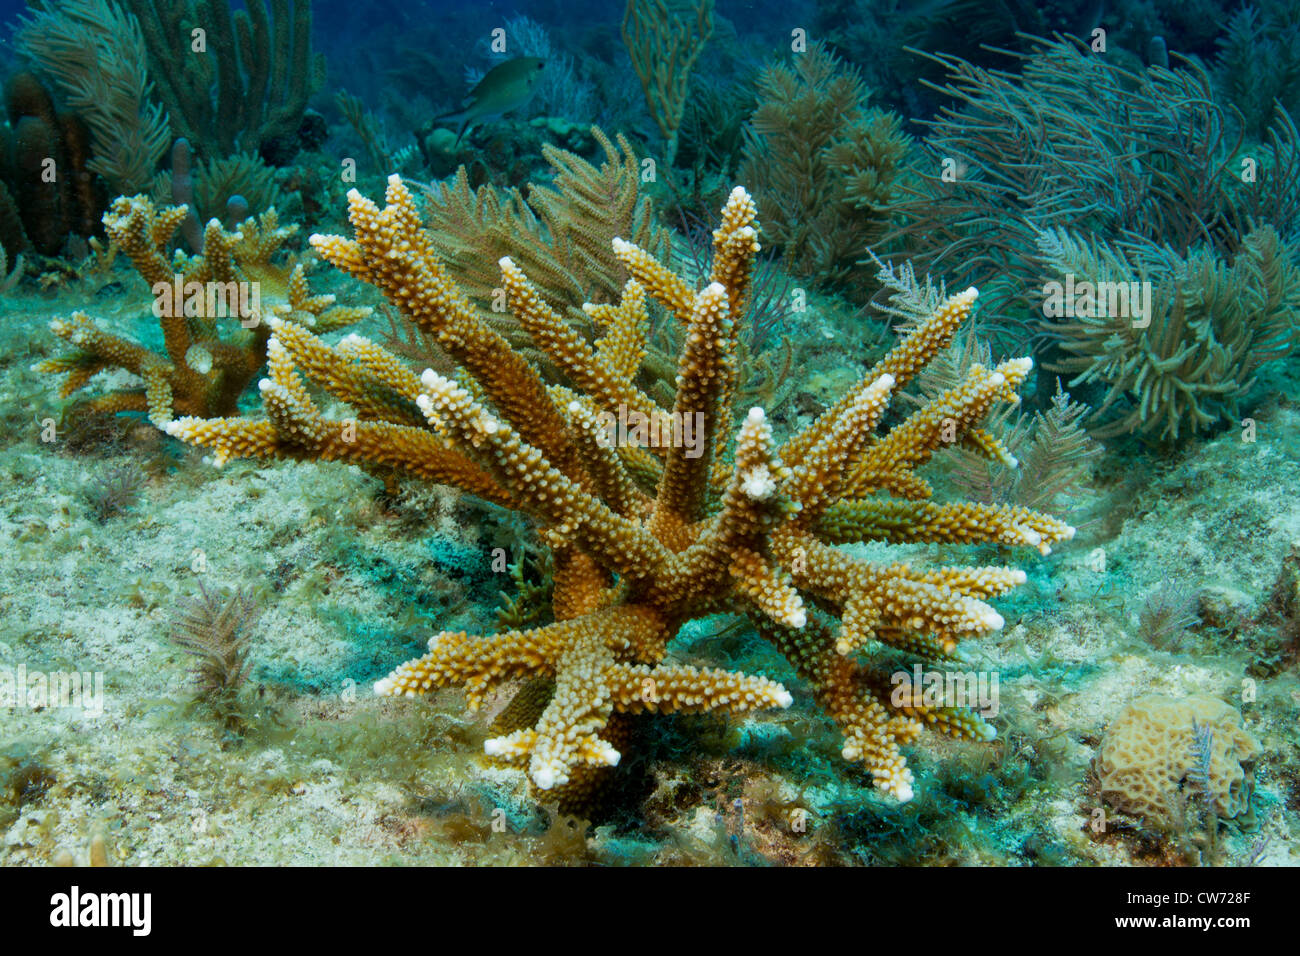 Staghorn coral grown in nursery and transplanted to reef by Coral Restoration Foundation Stock Photo